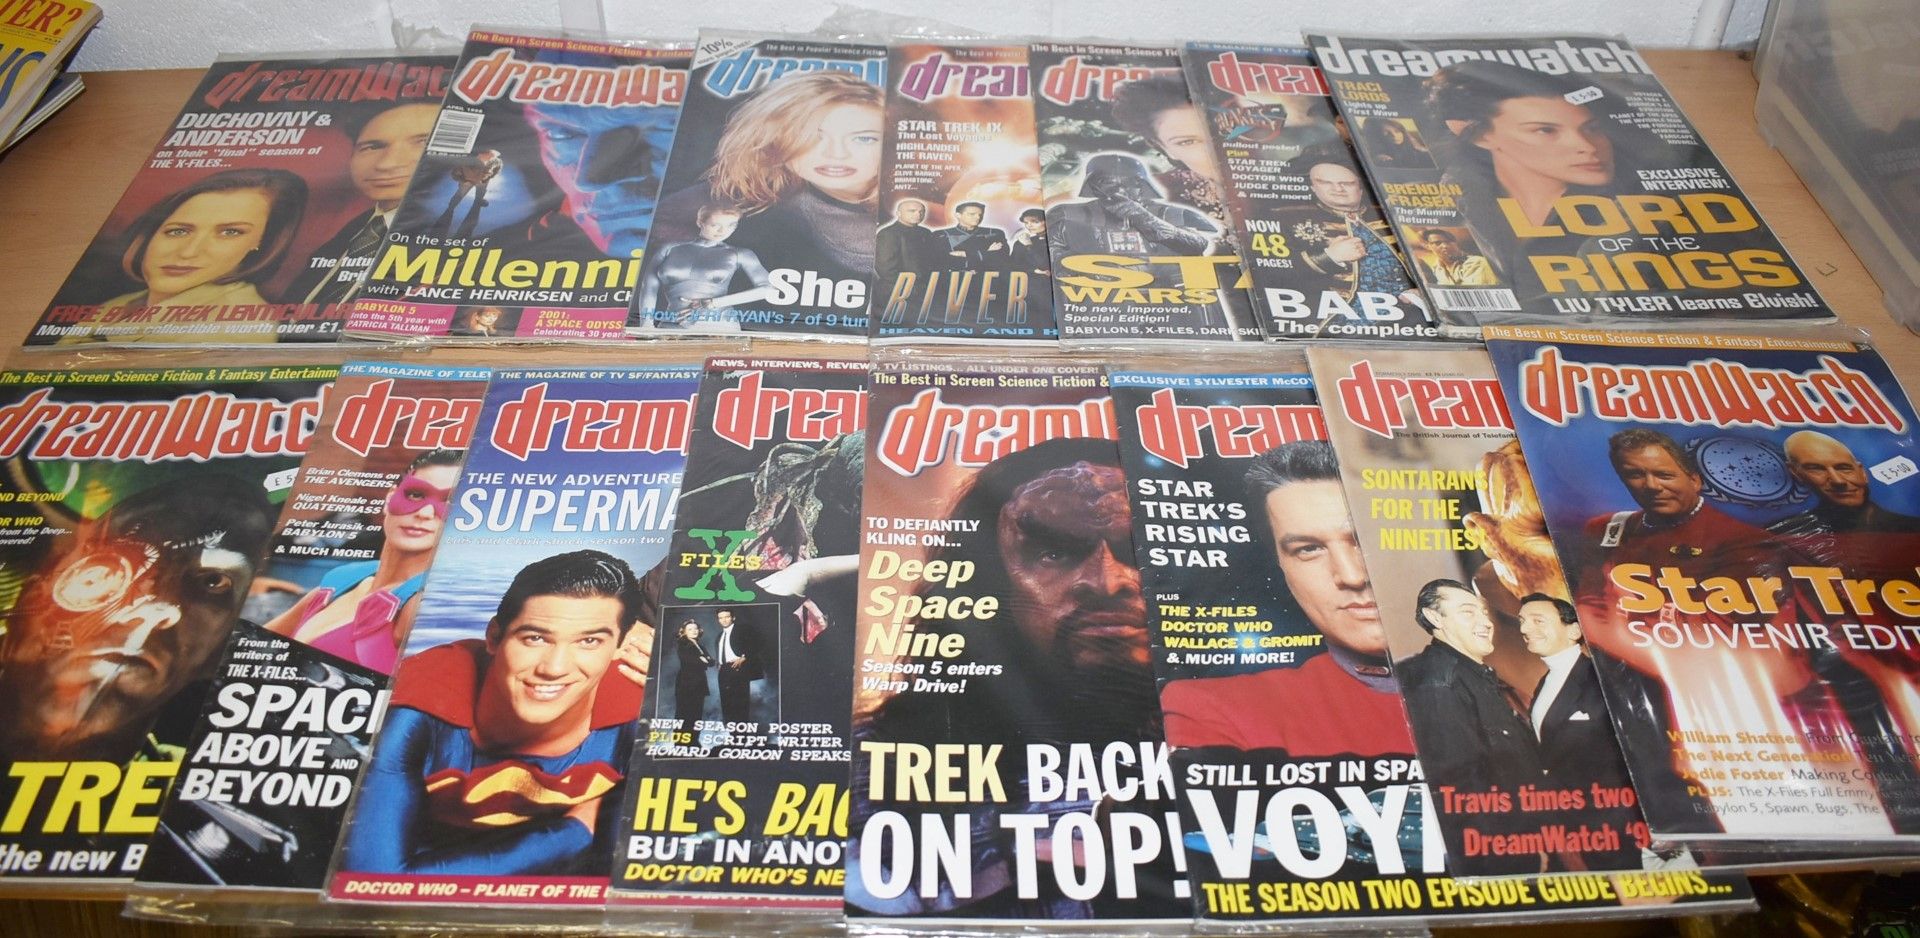 15 x Dreamwatch Science Fiction and Fantasy Film Magazines Dated From 1994 - Ref MB146 - CL431 -